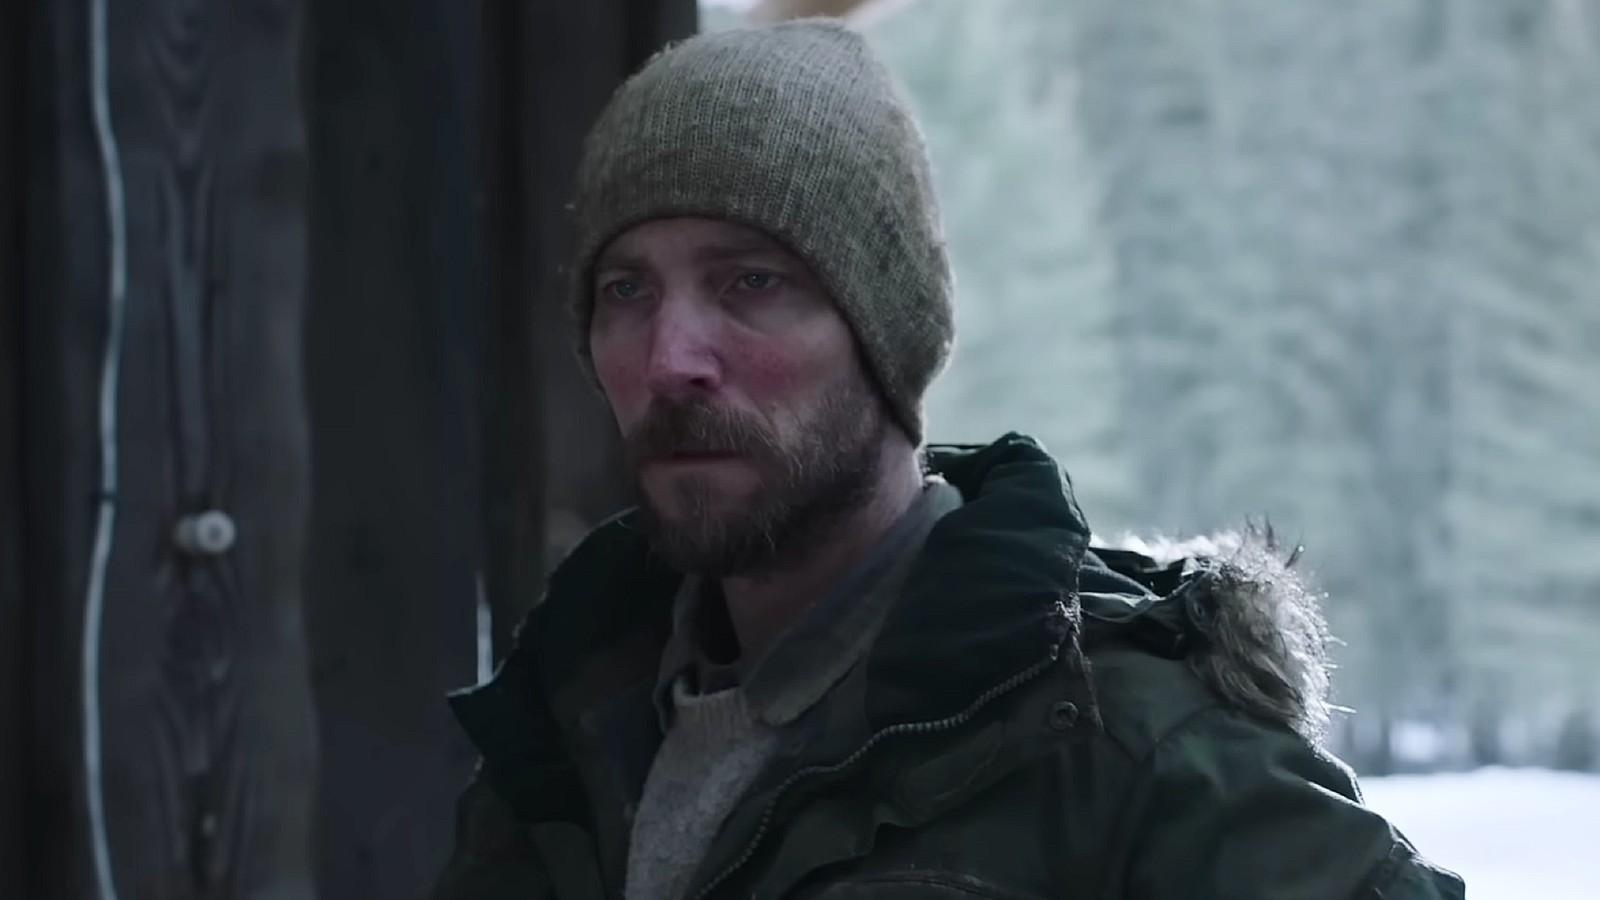 Wow, Just found out that Troy baker was on last night's episode of